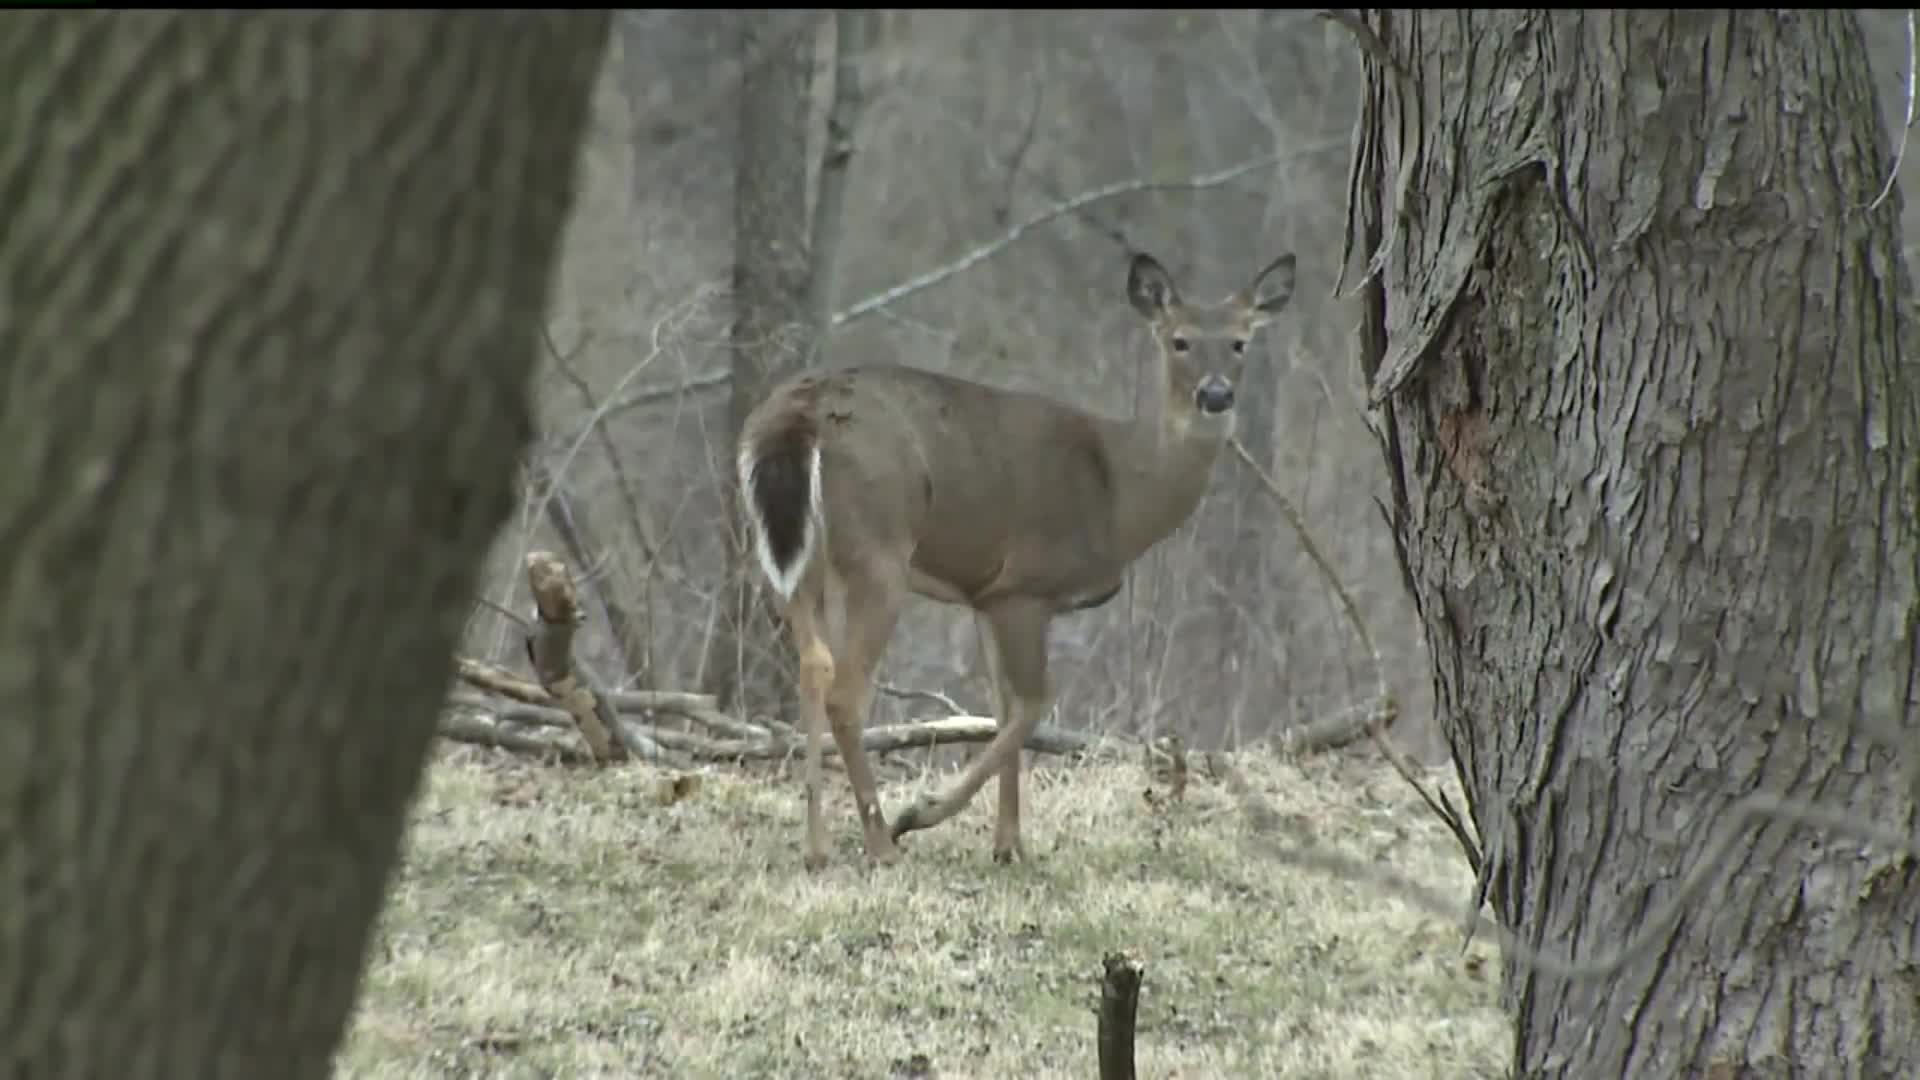 6 new cases of chronic wasting disease in deer